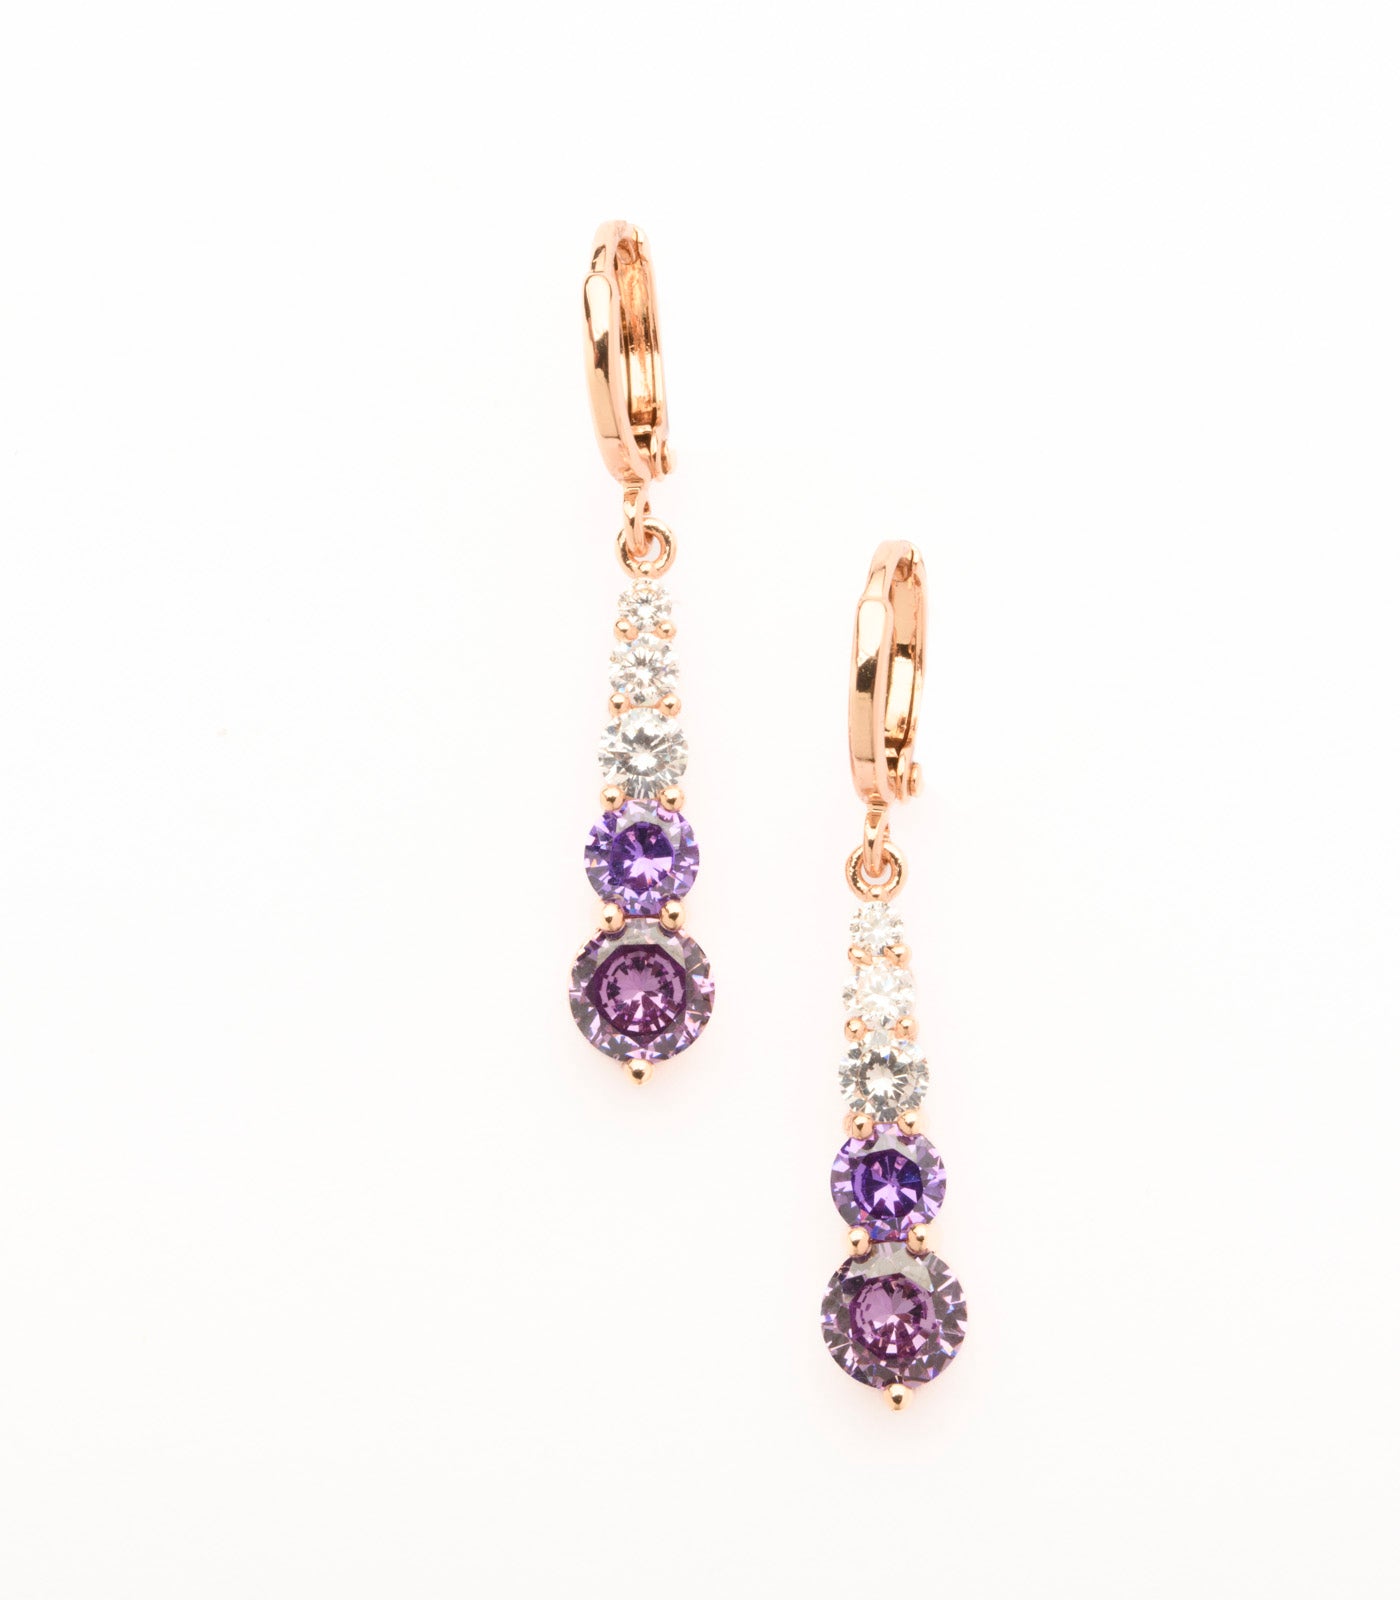 Decorative Trail Of The Shiny Purple Stones Earrings (Brass)